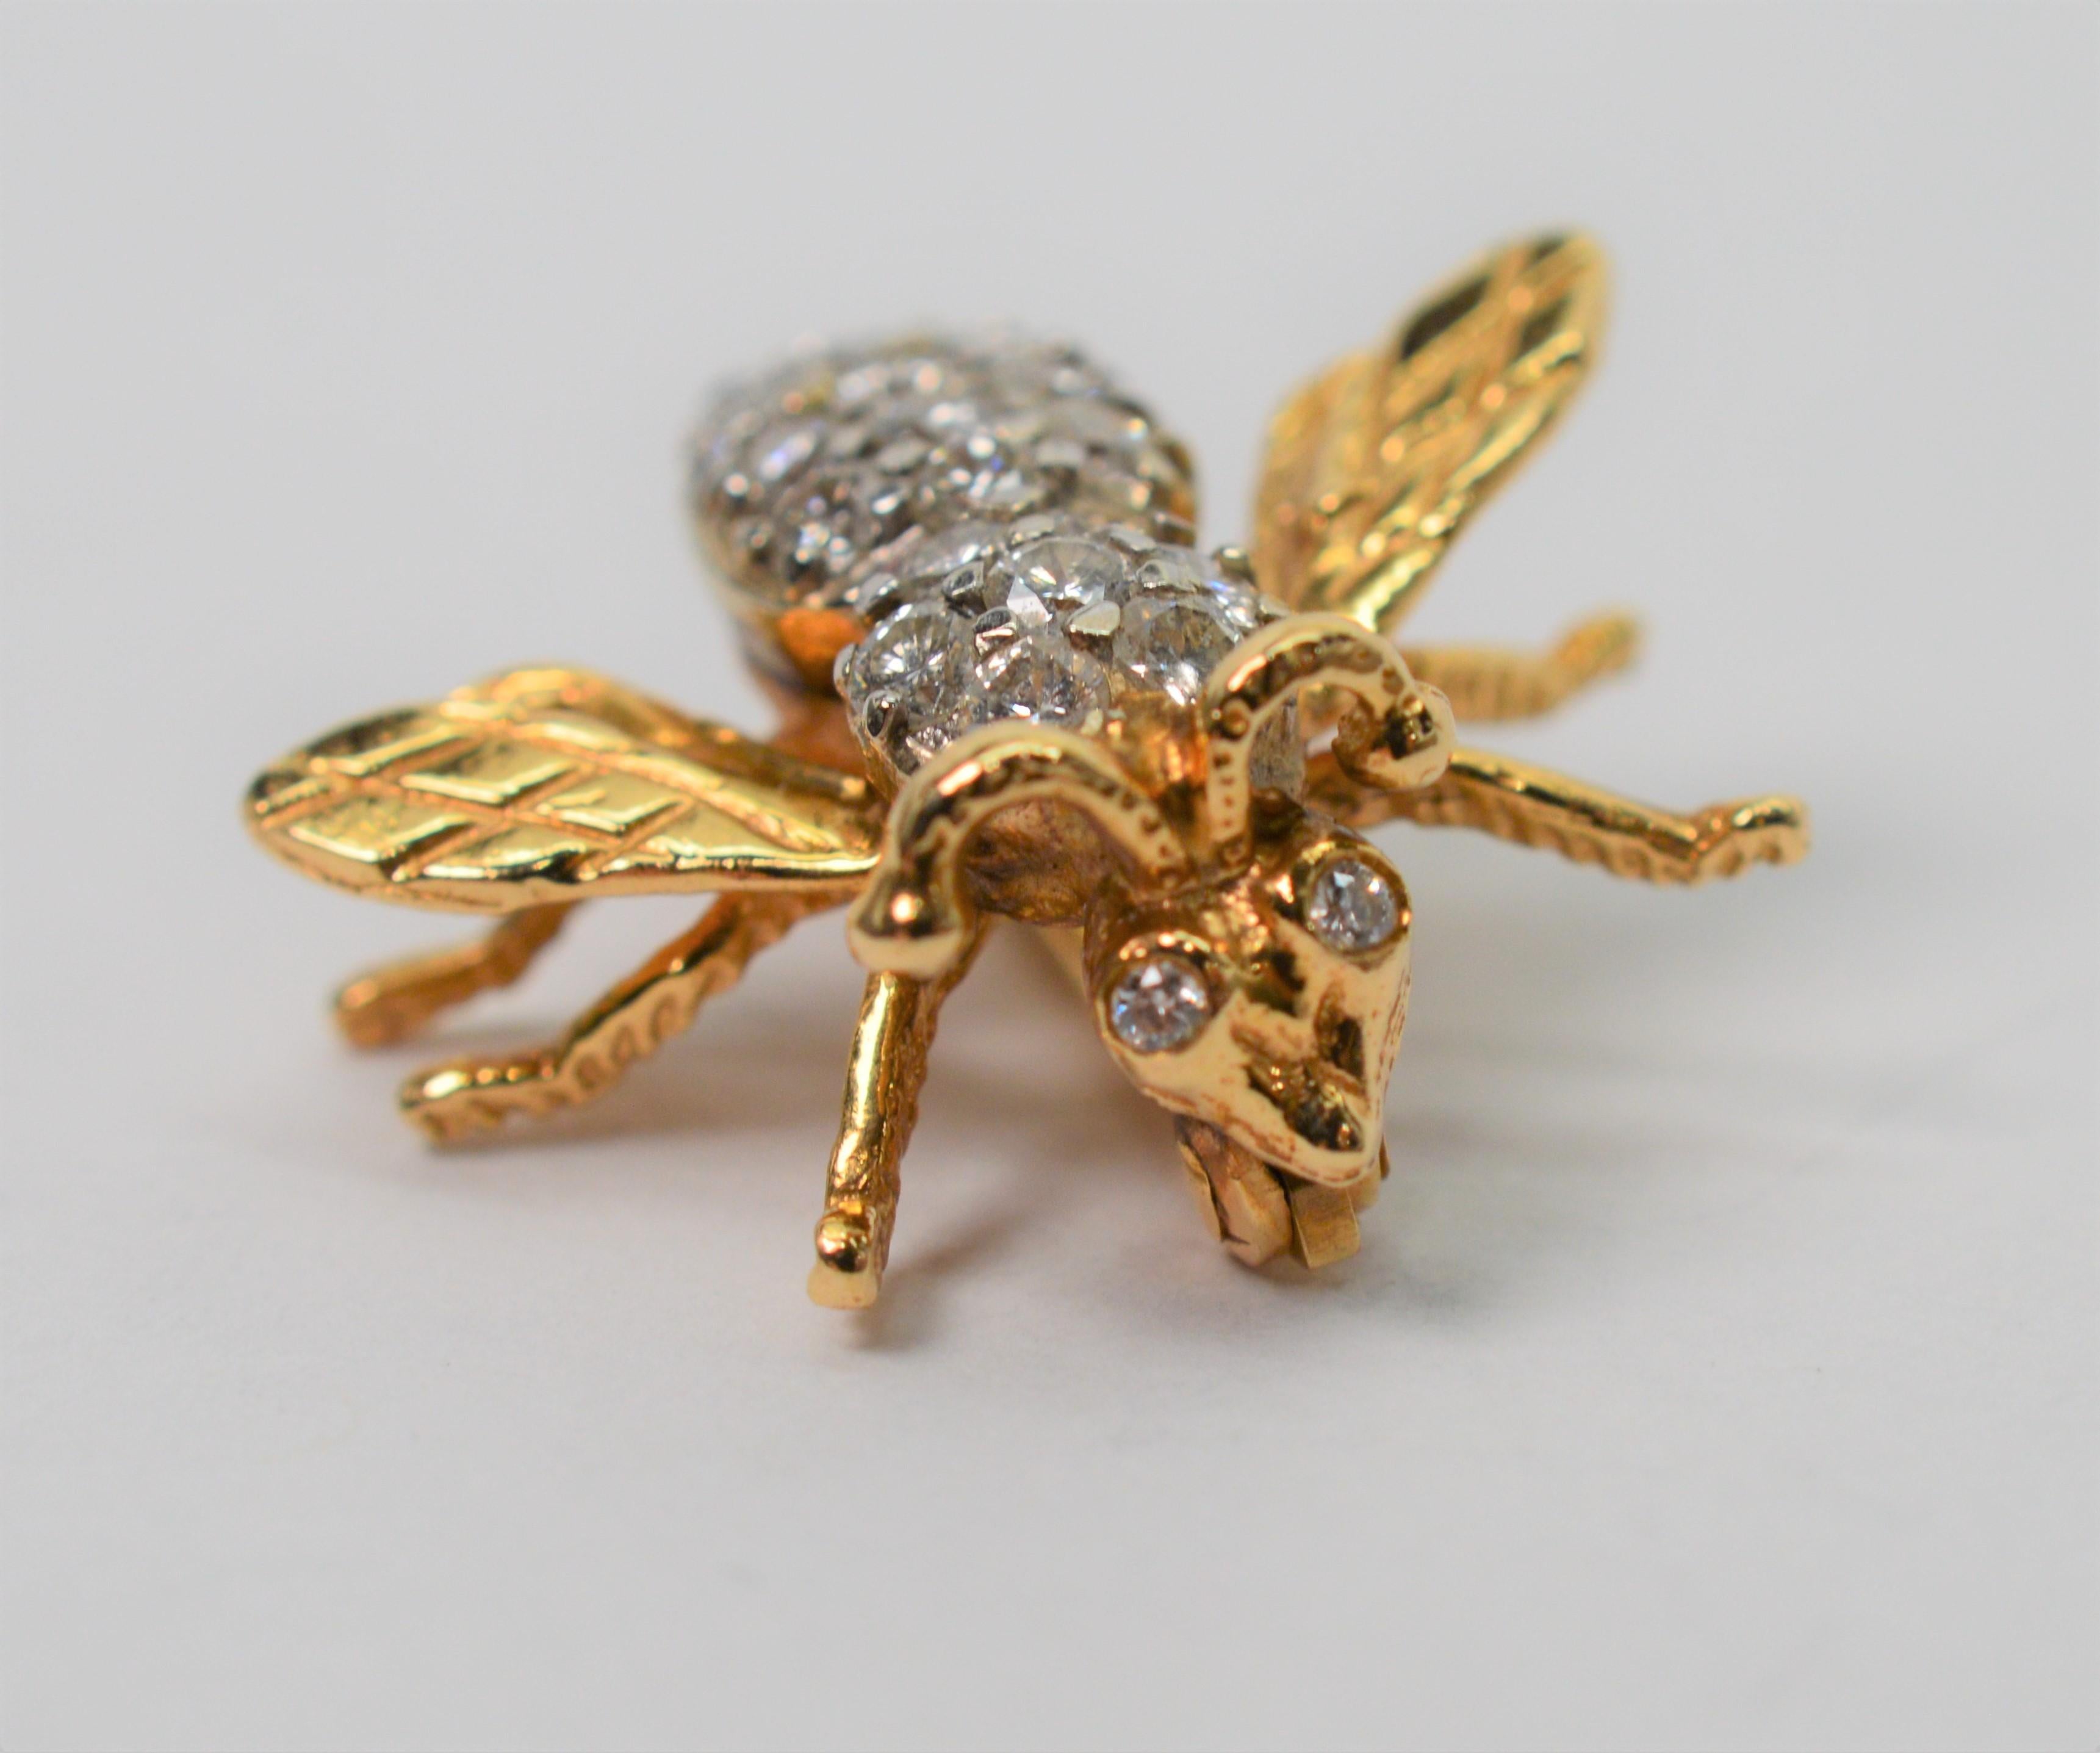 Be all the buzz wearing this adorable diamond covered fourteen karat 14K yellow gold bumble bee pin brooch. With gold wings, six legs and antenna, this 7/8 inch queen bee sparkles with twenty H/VS fine white diamonds, for a total weight of .60